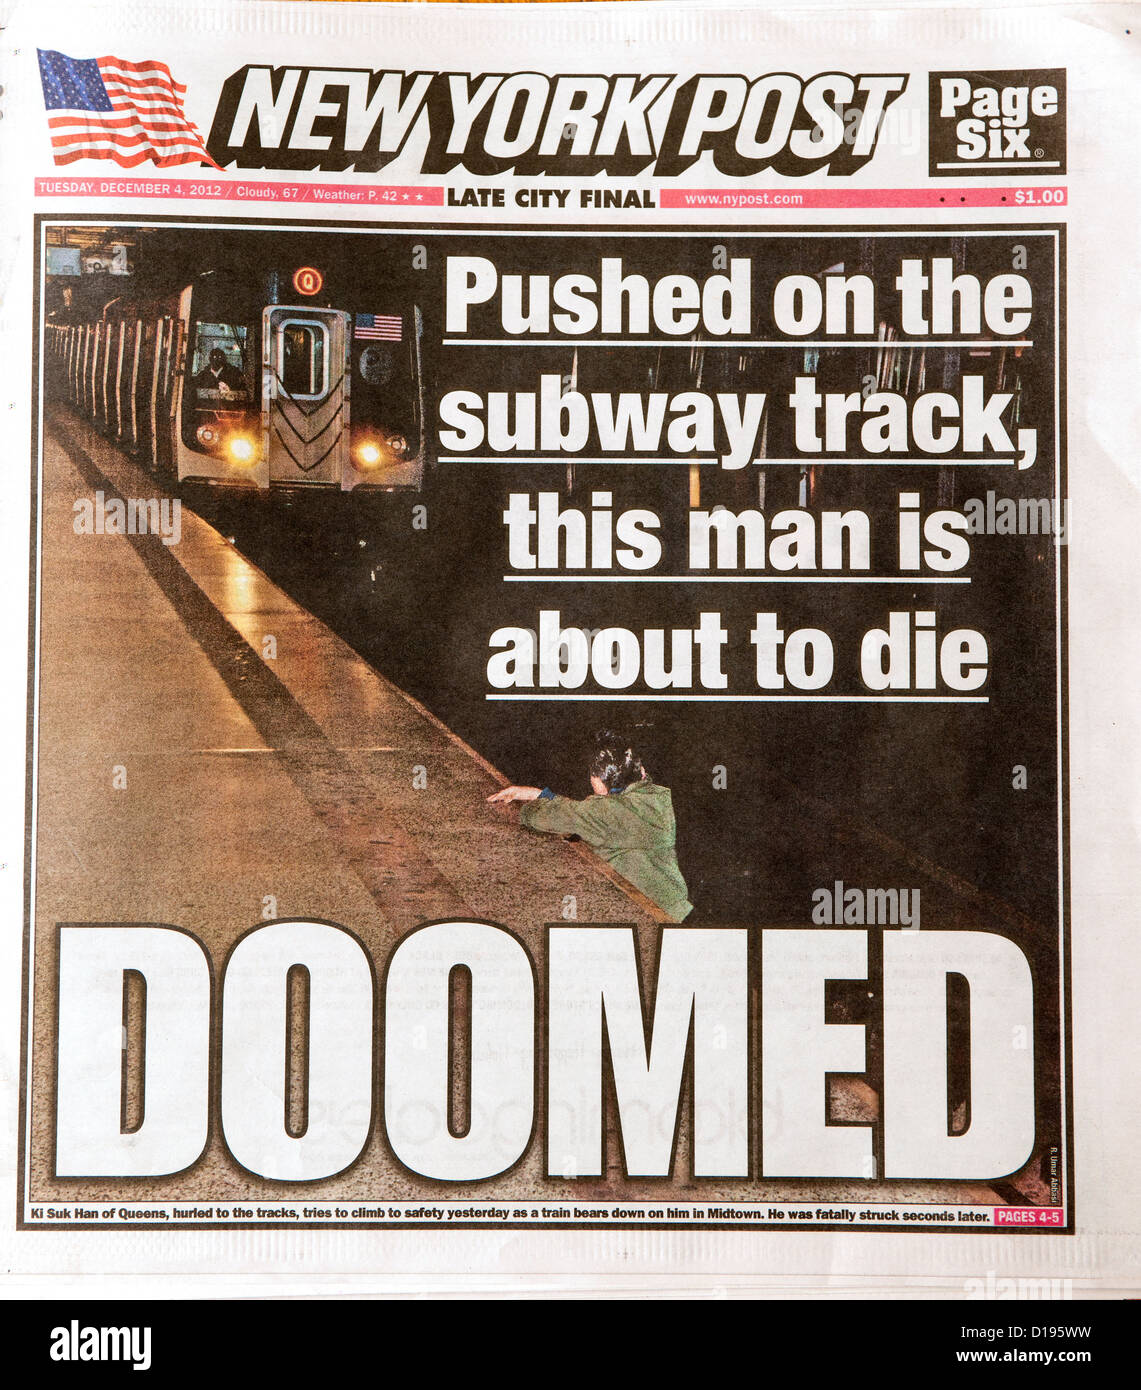 The New York Post cover shows a photograph of Ki Suk Han just prior to being run over by a Q train Stock Photo